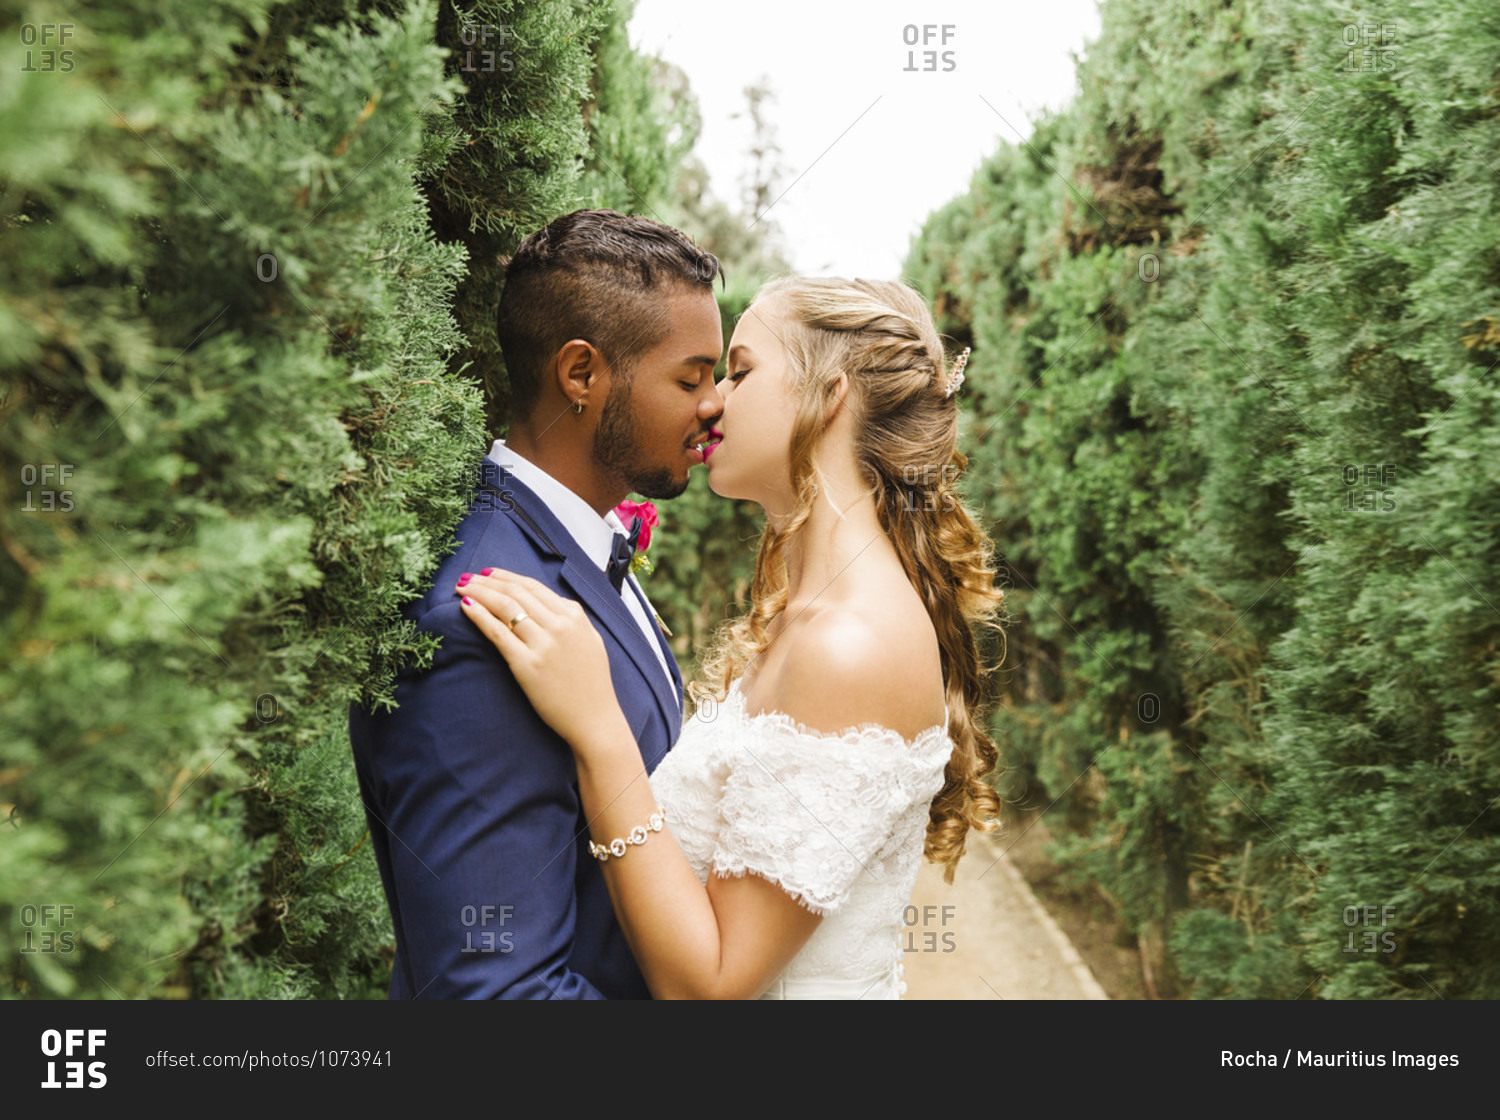 Wedding, newlyweds, young adults, diversity, love, garden, hedge, kissing